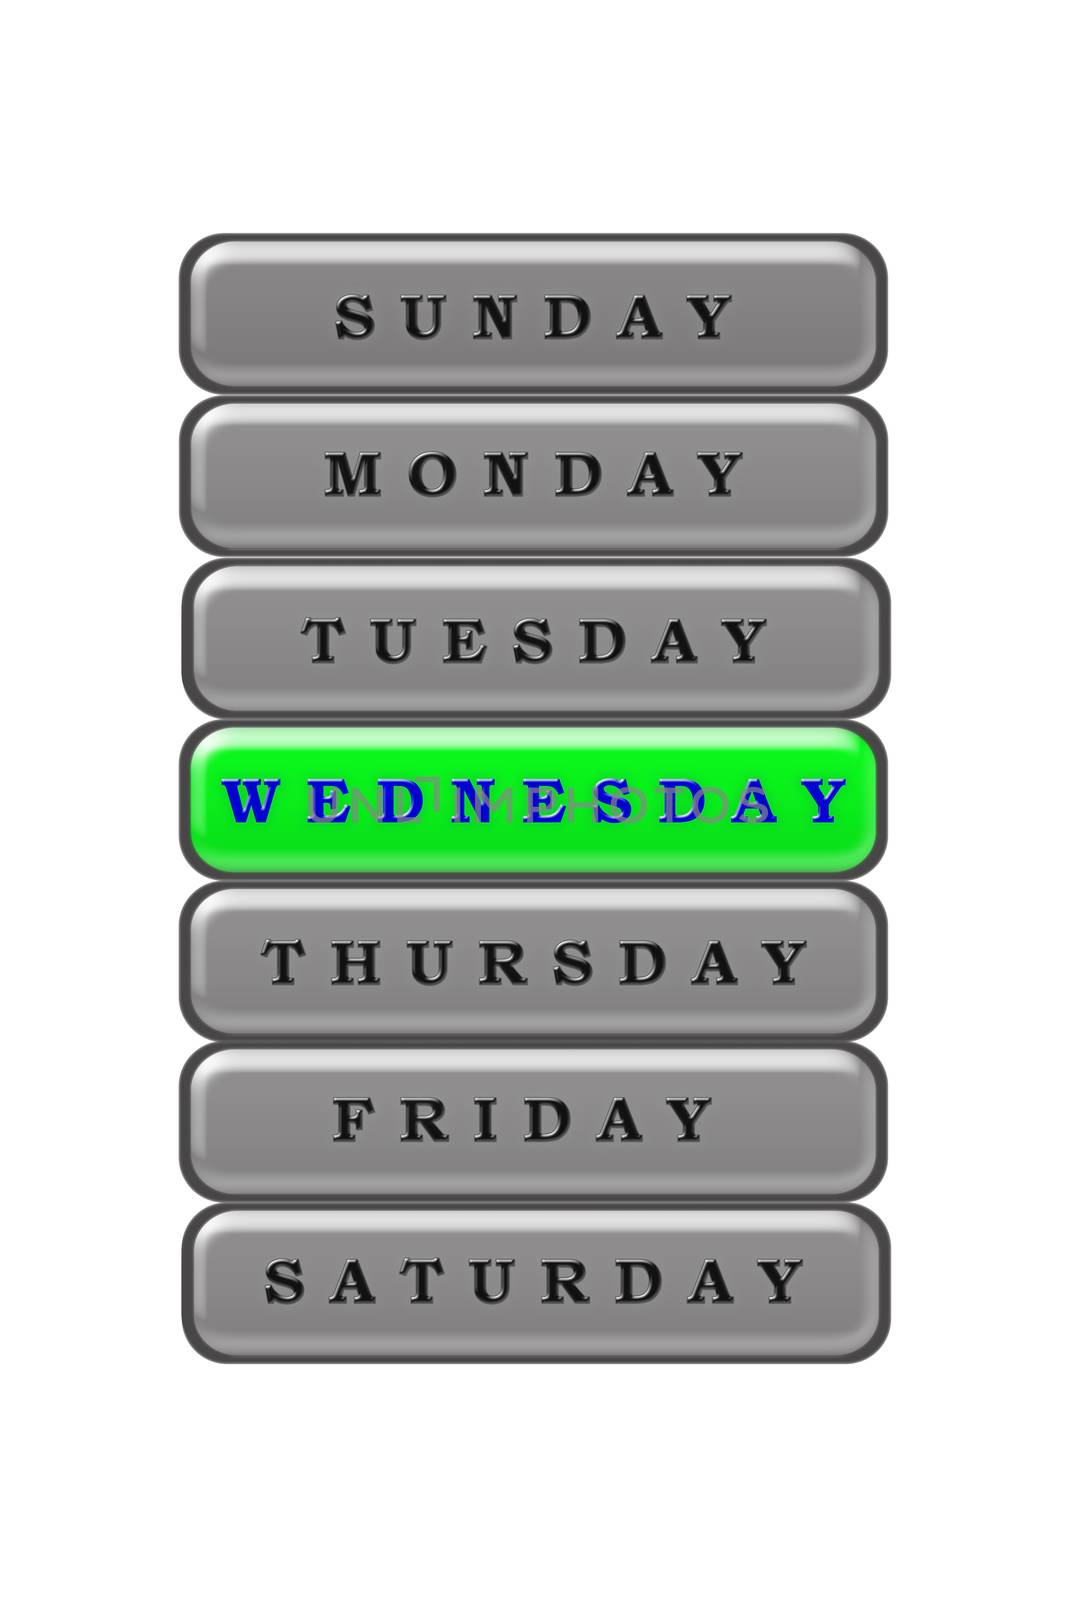 Among the days of the week, the environment is highlighted in blue on a green background.